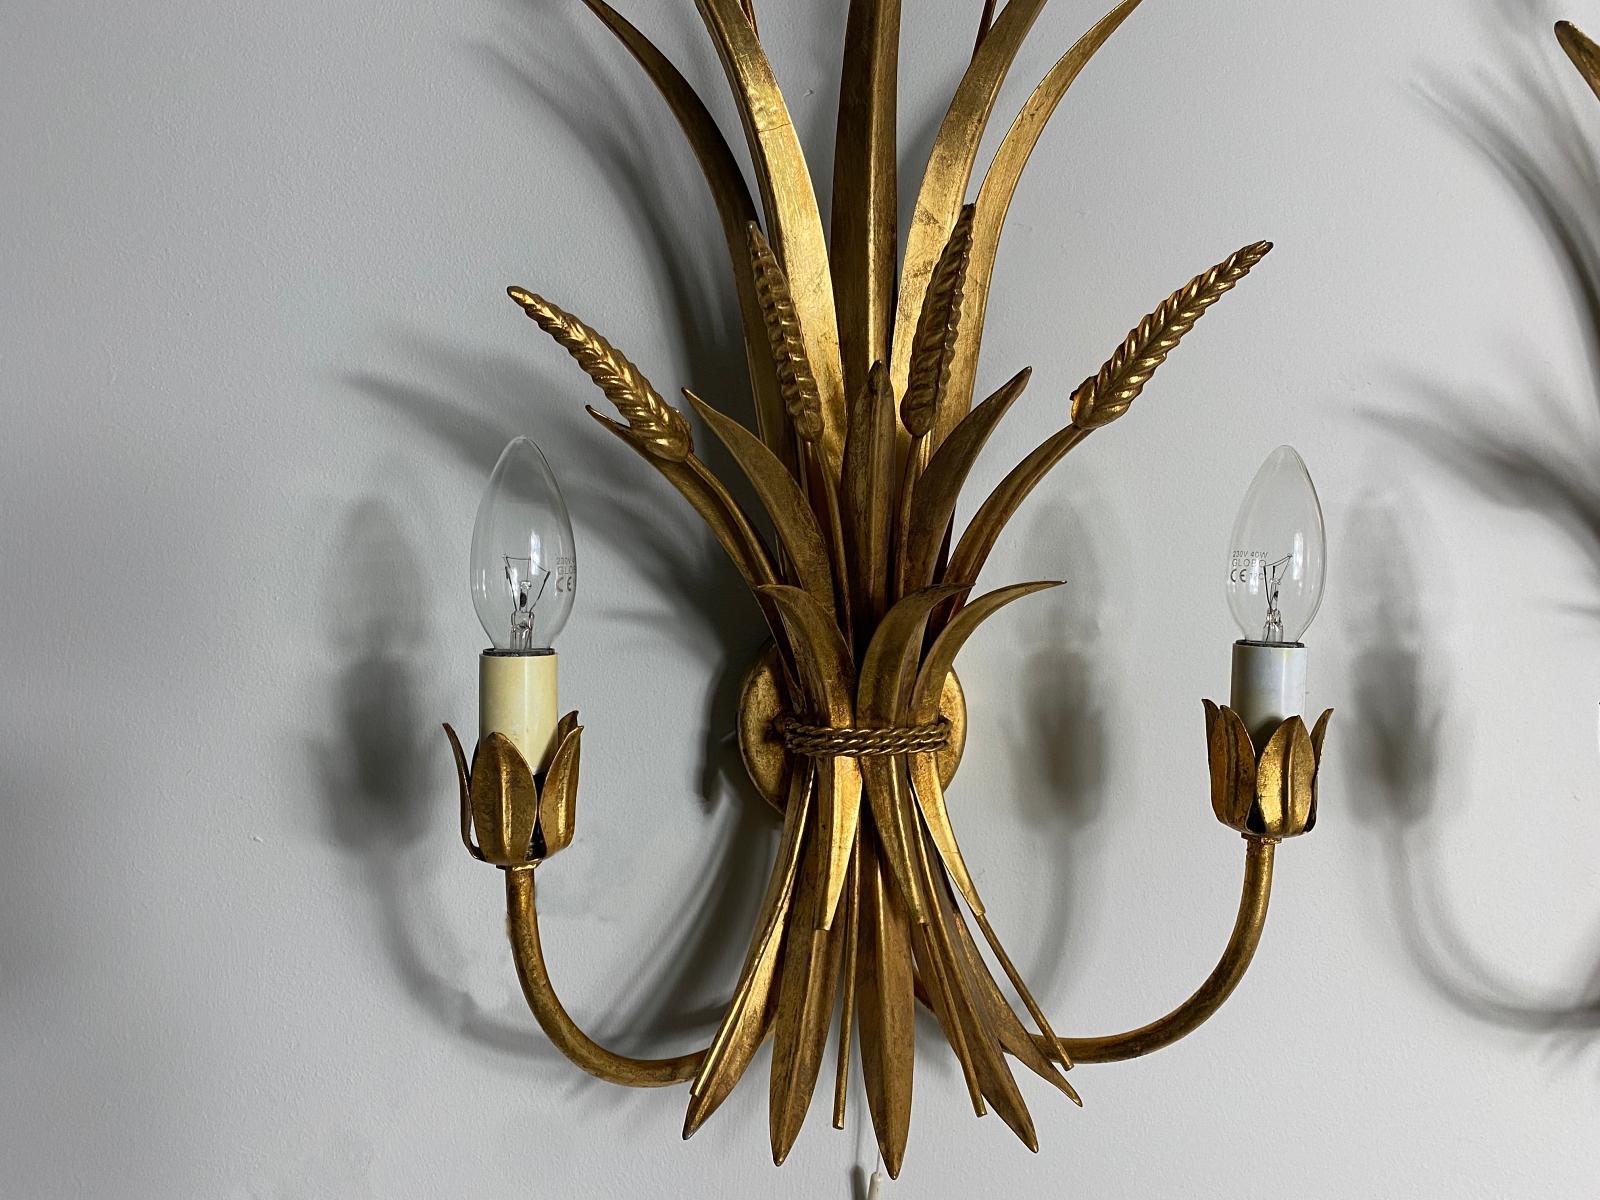 HANS KÖGL Pair Gilded Wheat Hollywood Regency Sconce Wall Lights, 1970s, Germany In Good Condition For Sale In Biebergemund, Hessen